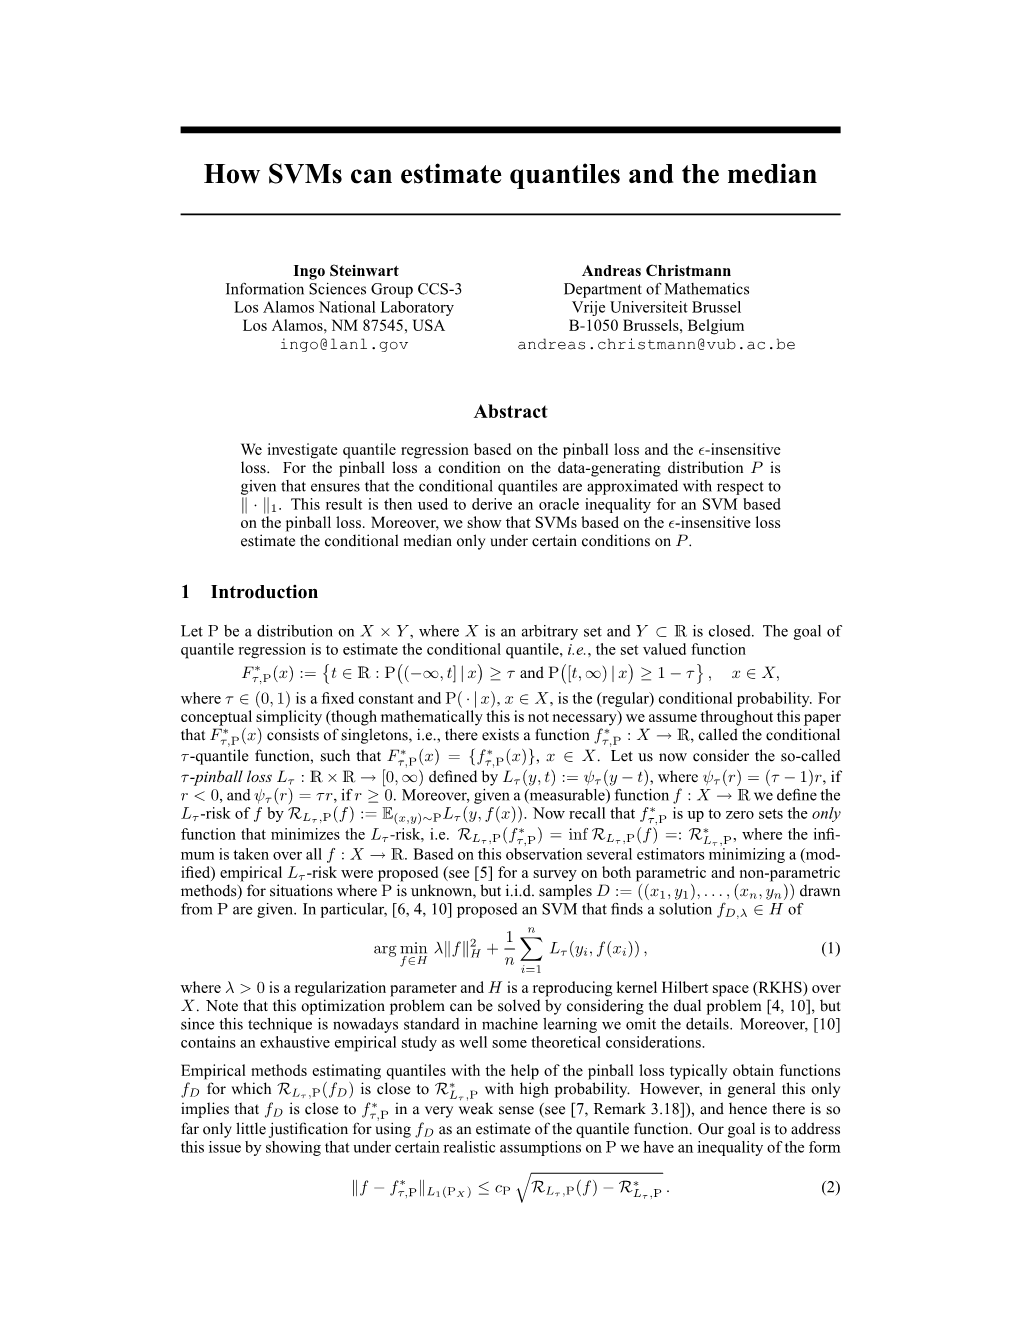 How Svms Can Estimate Quantiles and the Median